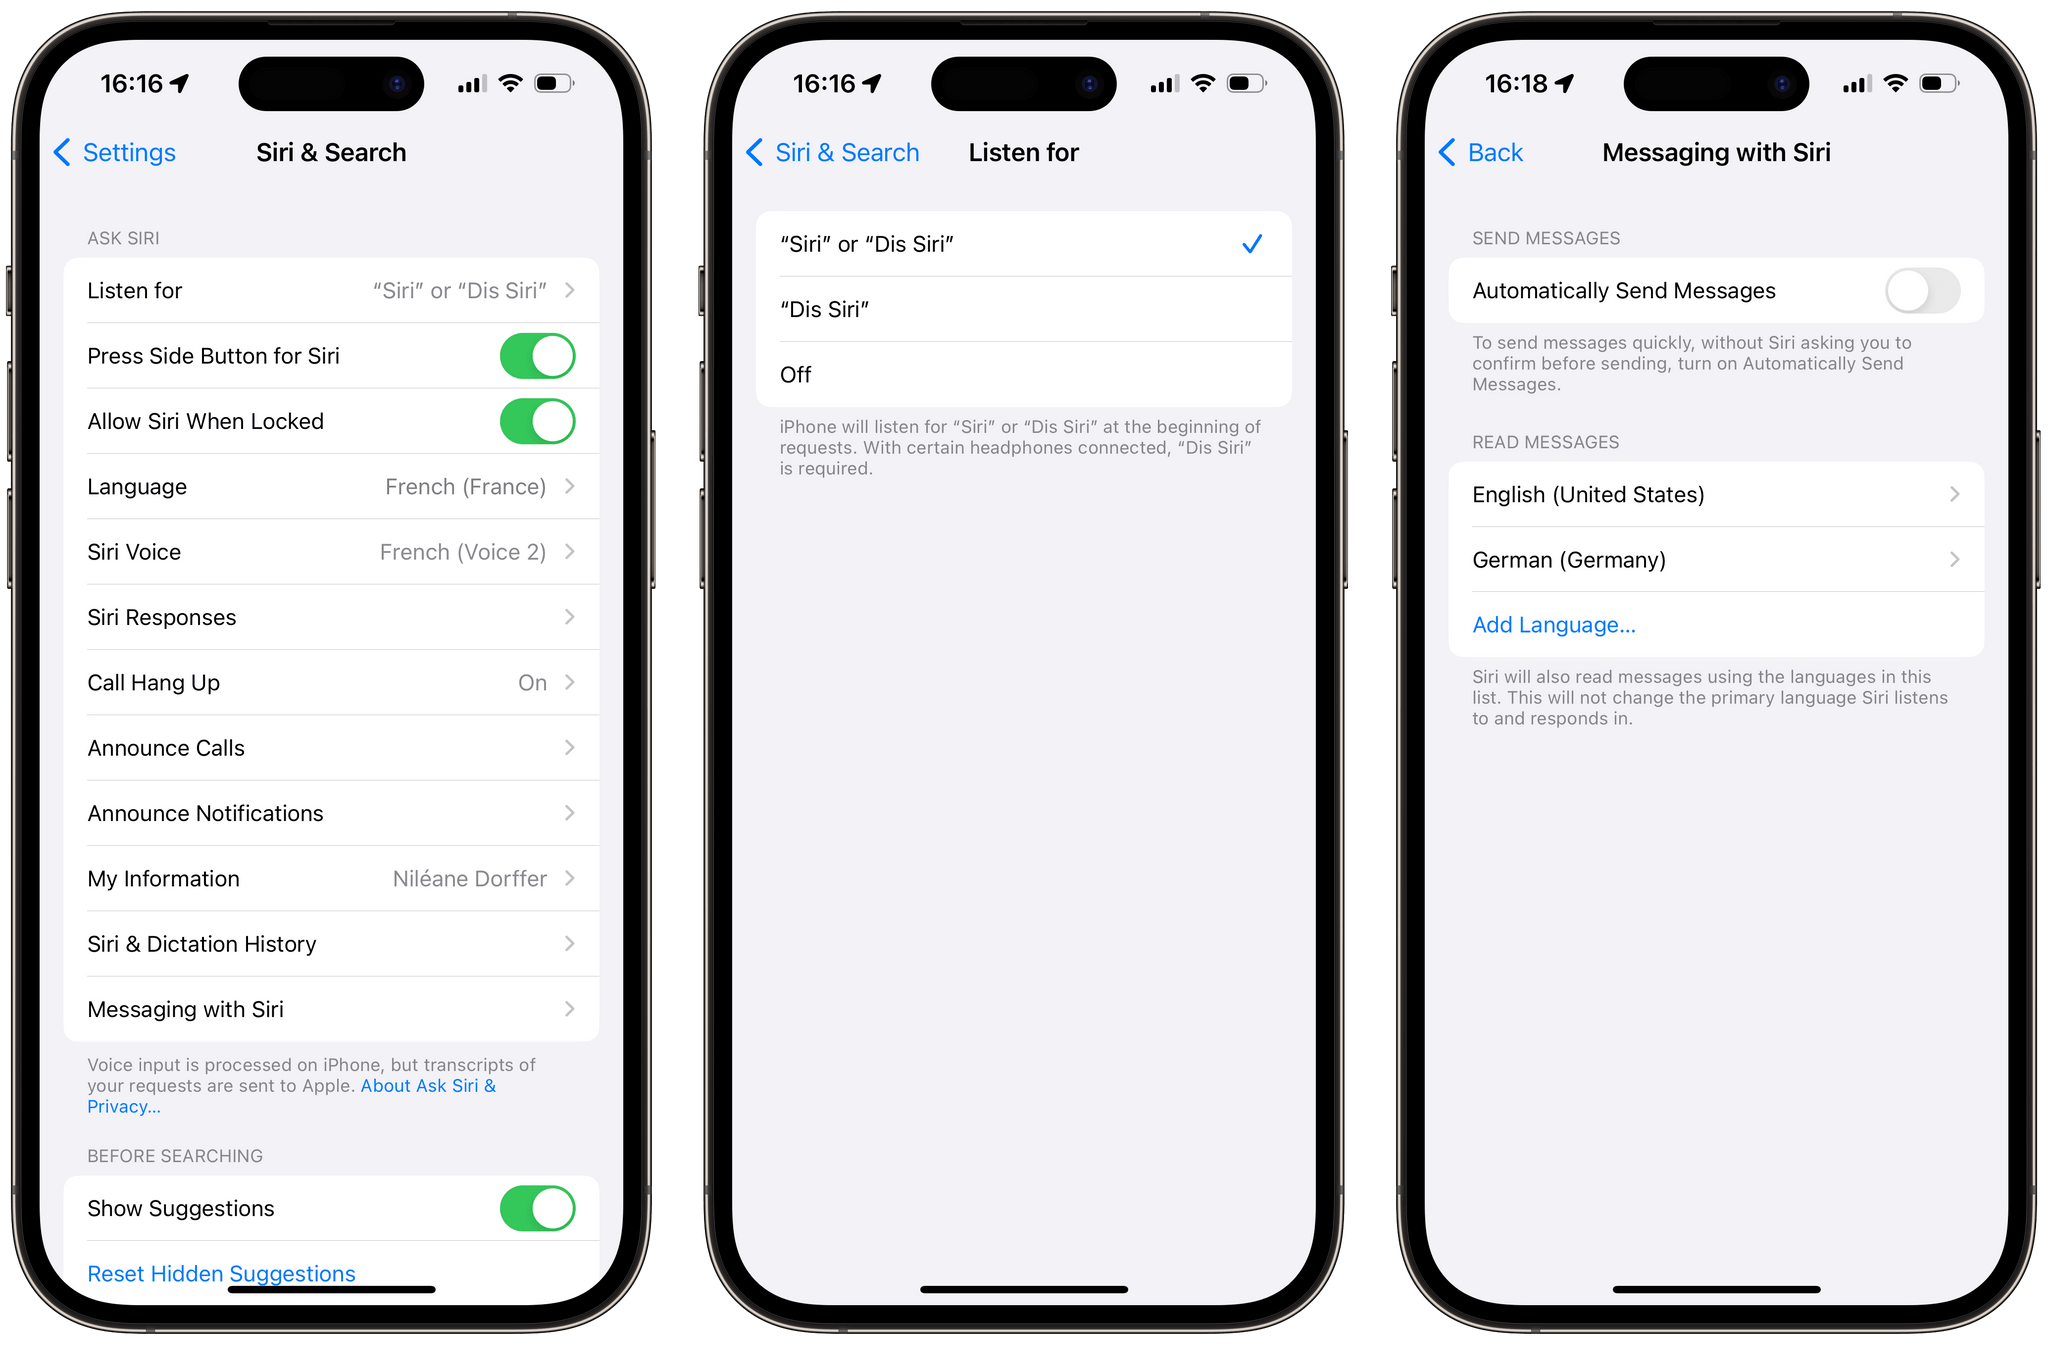 With Siri set to French, I can now say "Siri" instead of the full "Dis Siri." In Settings → Siri & Search → Messaging with Siri, I can now also add English and German as one of the languages Siri will read my messages in.